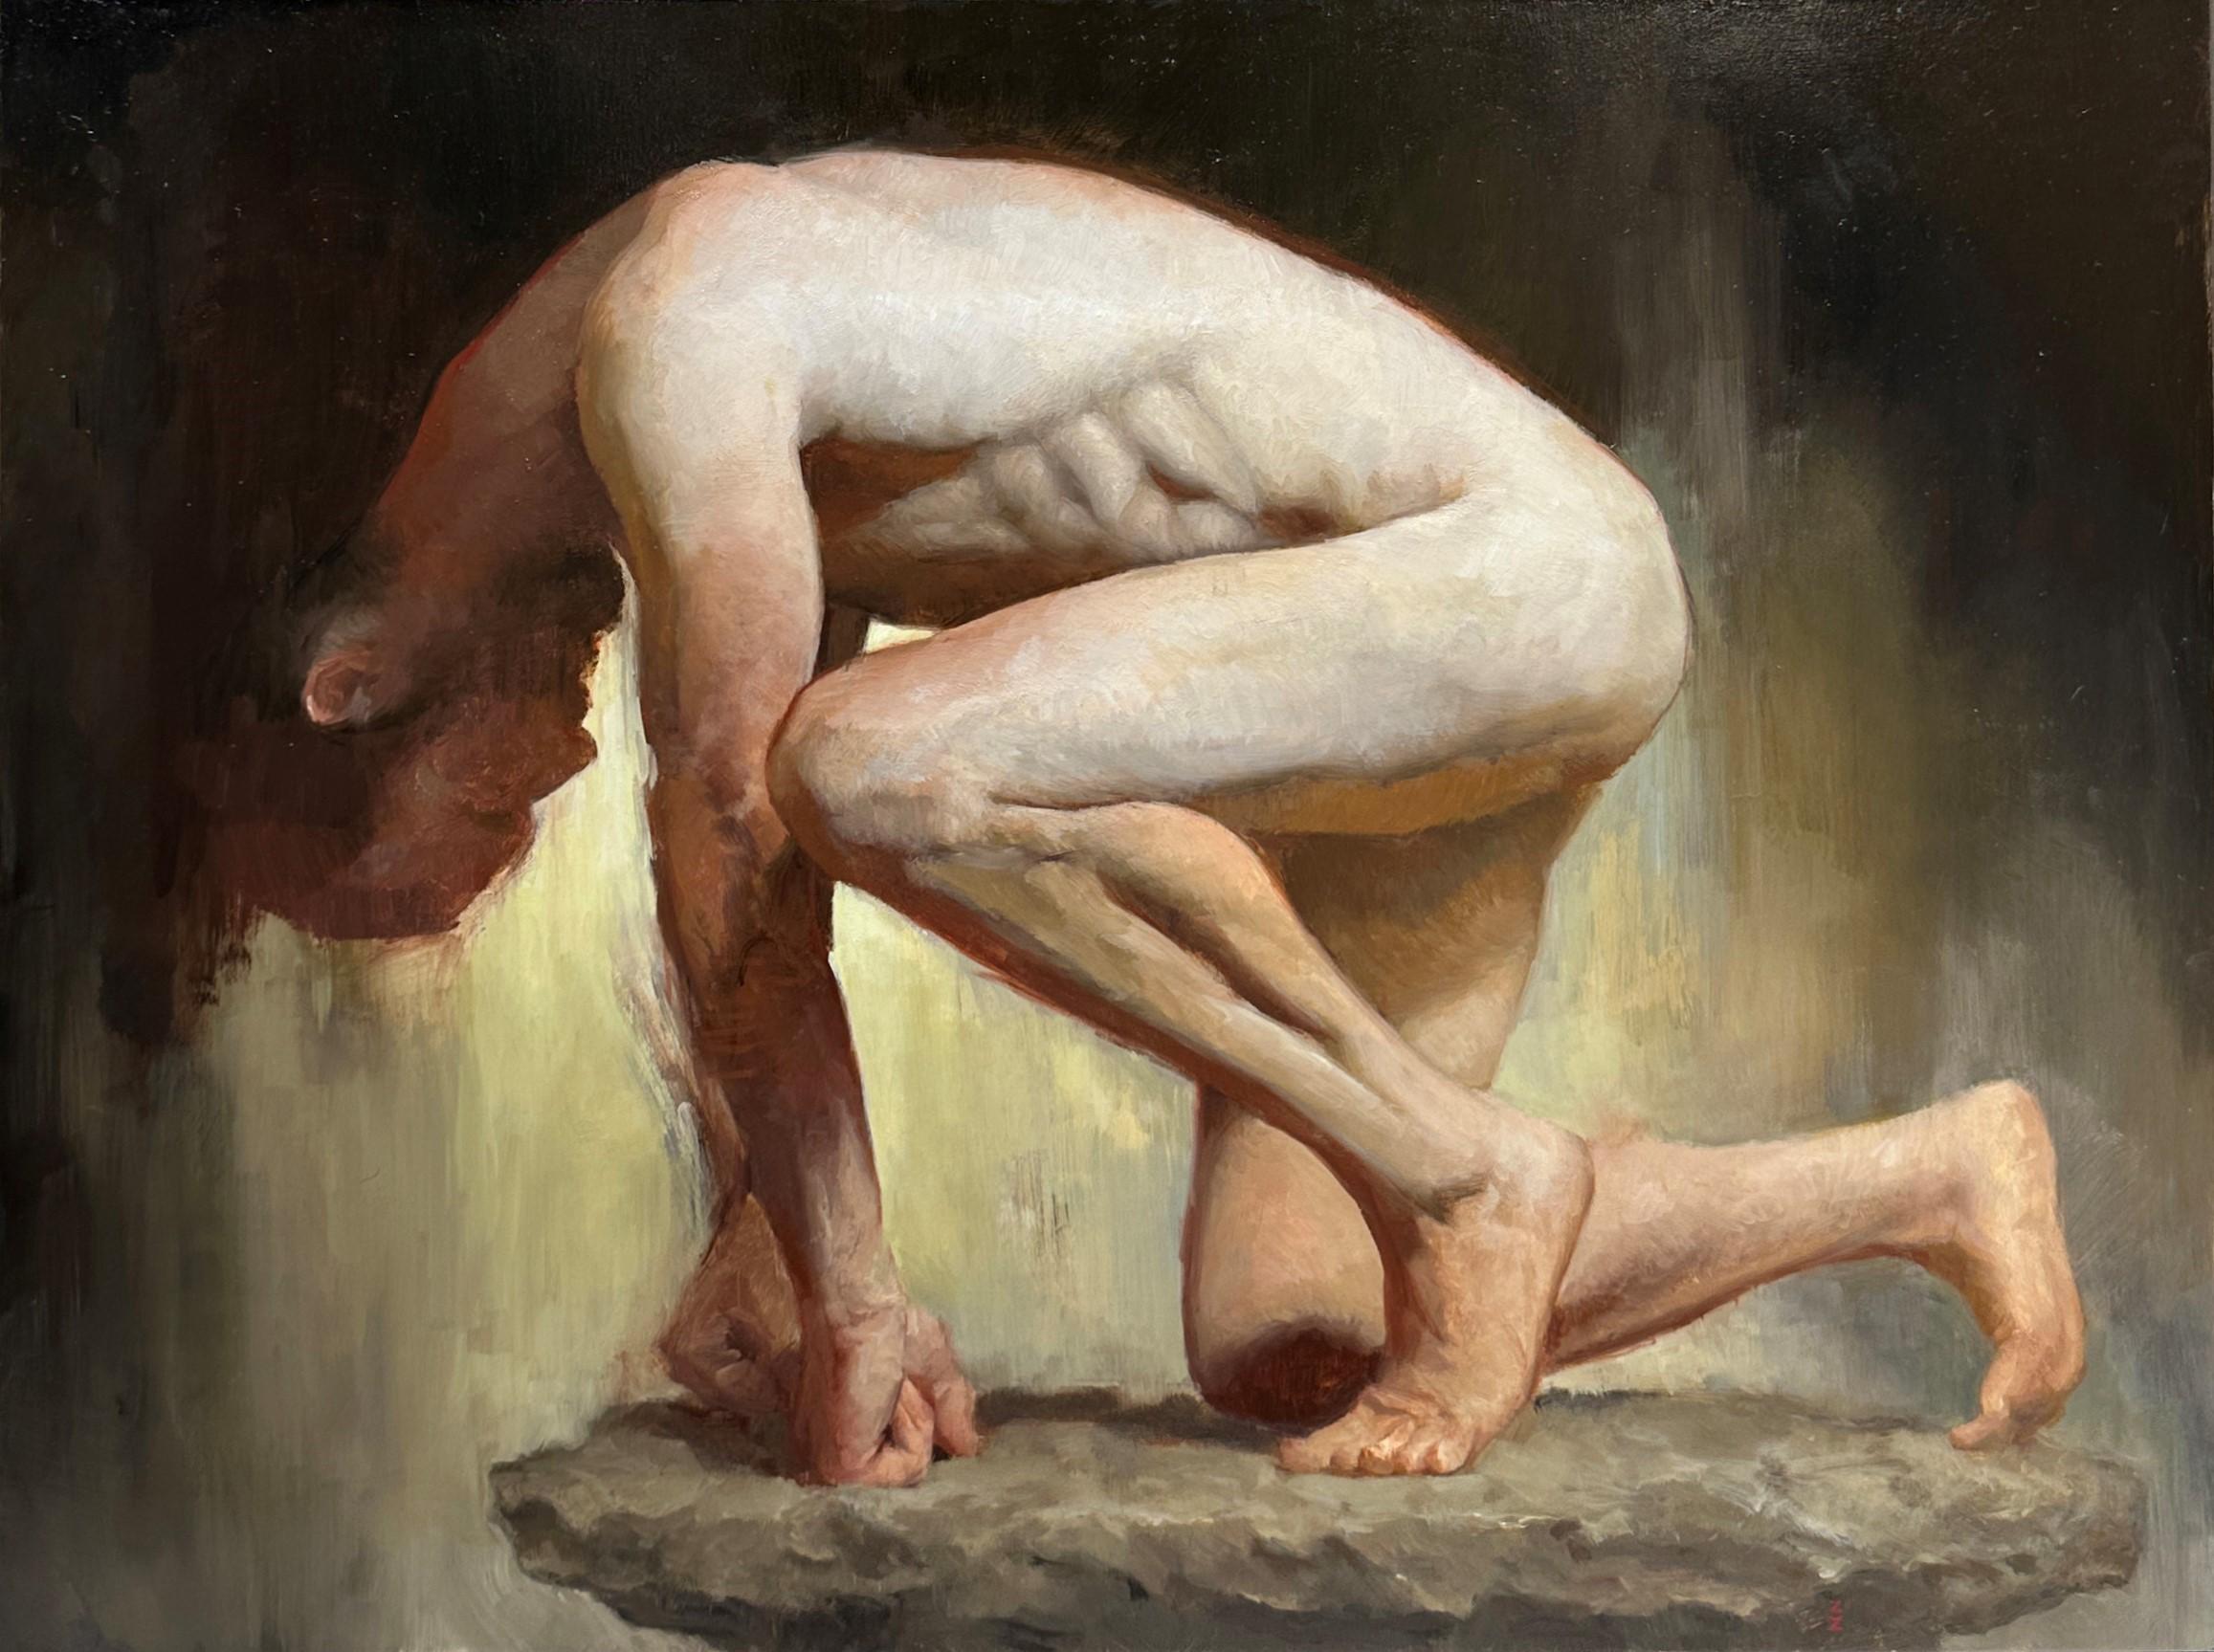 Zack Zdrale Nude Painting - Pressure System, Male Nude Crouching on a Stone Pedestal, Original Oil on Panel